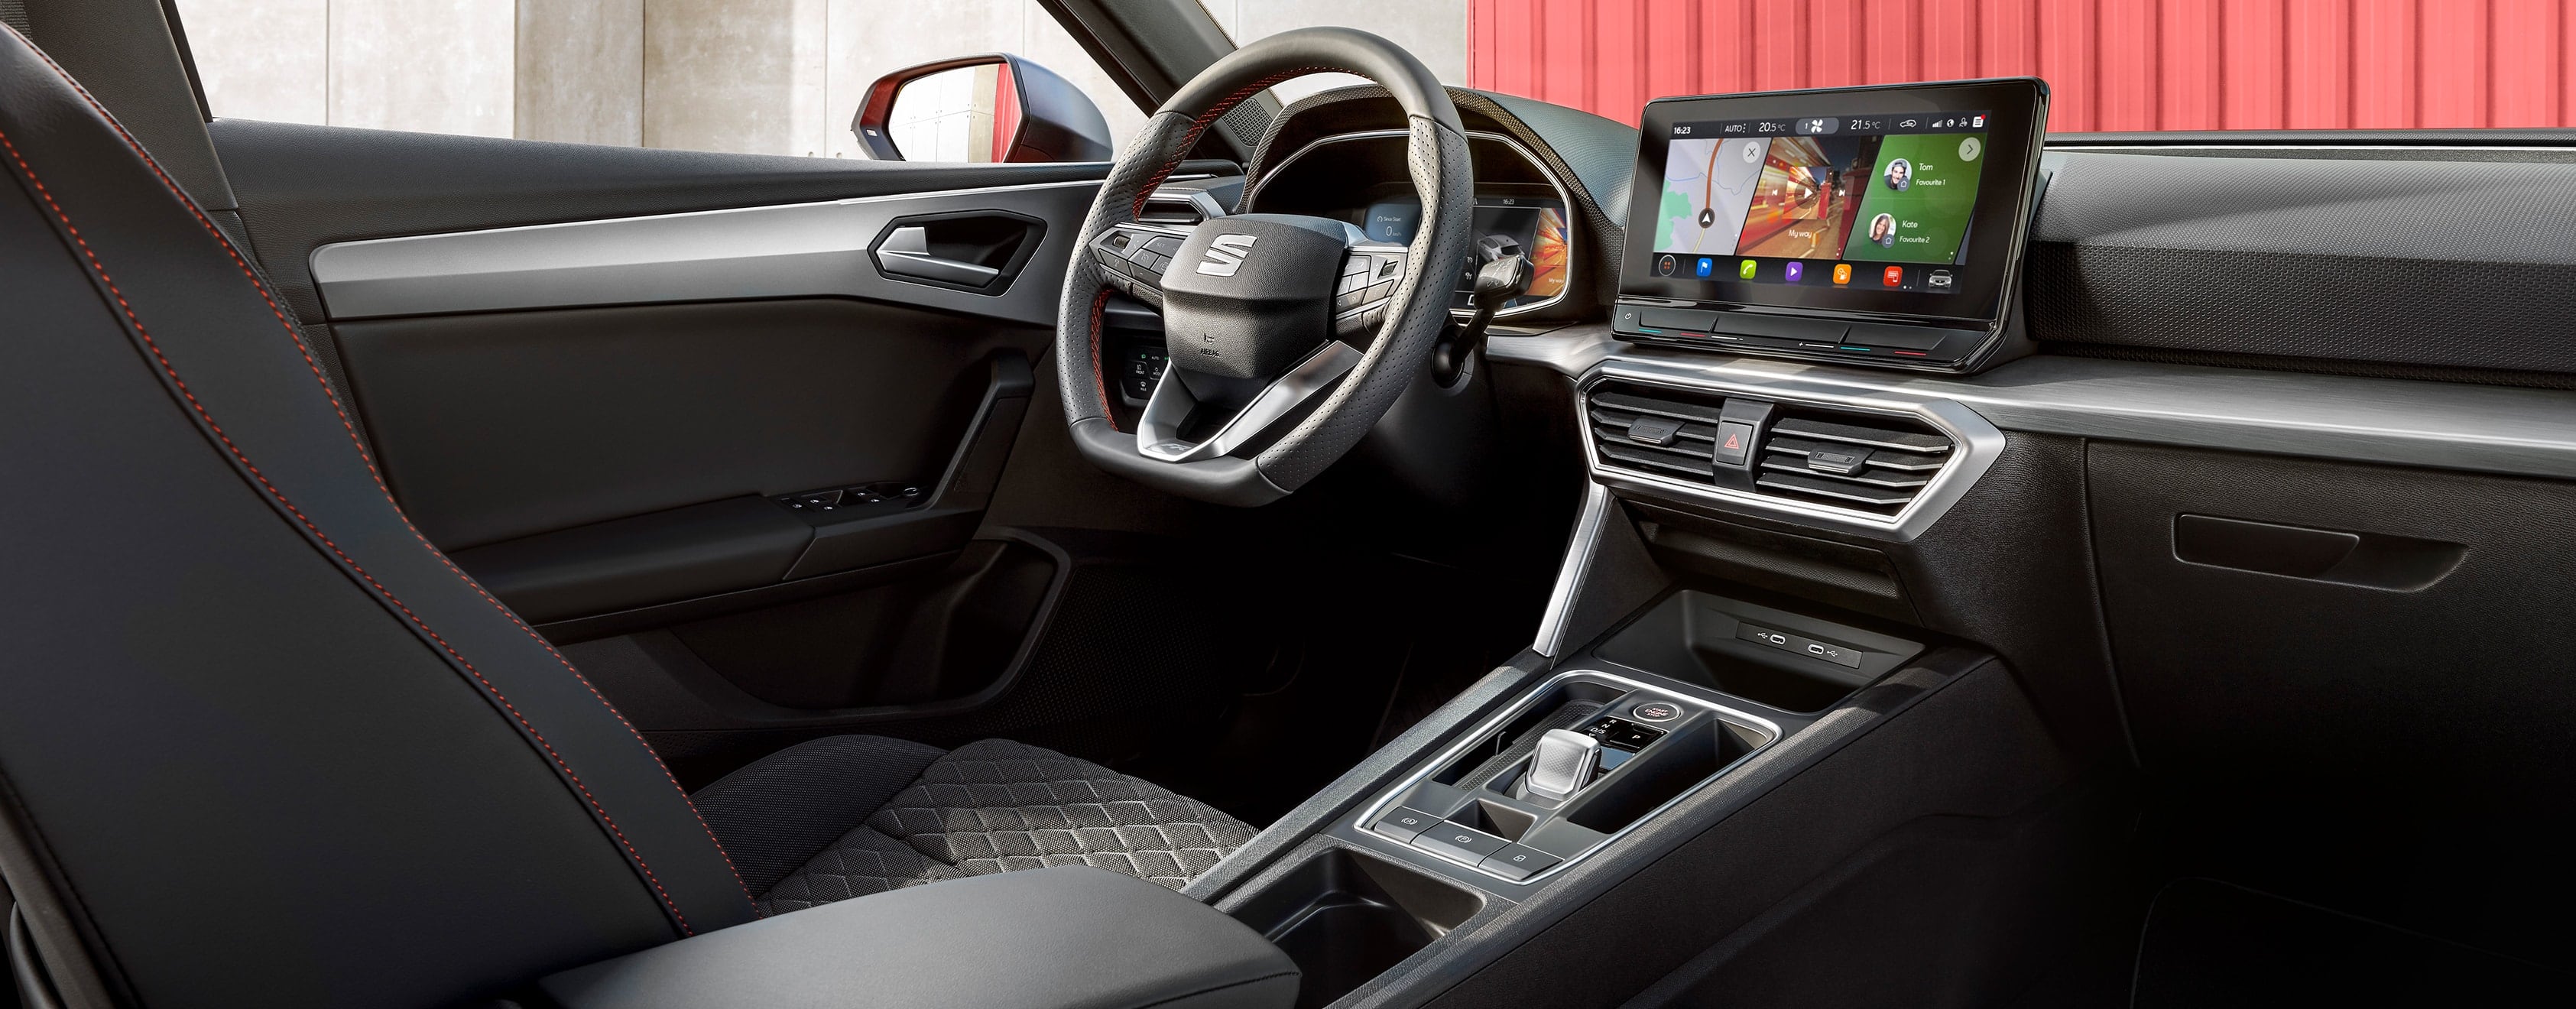 SEAT Leon 2020 technology features 10 inch navi system close up